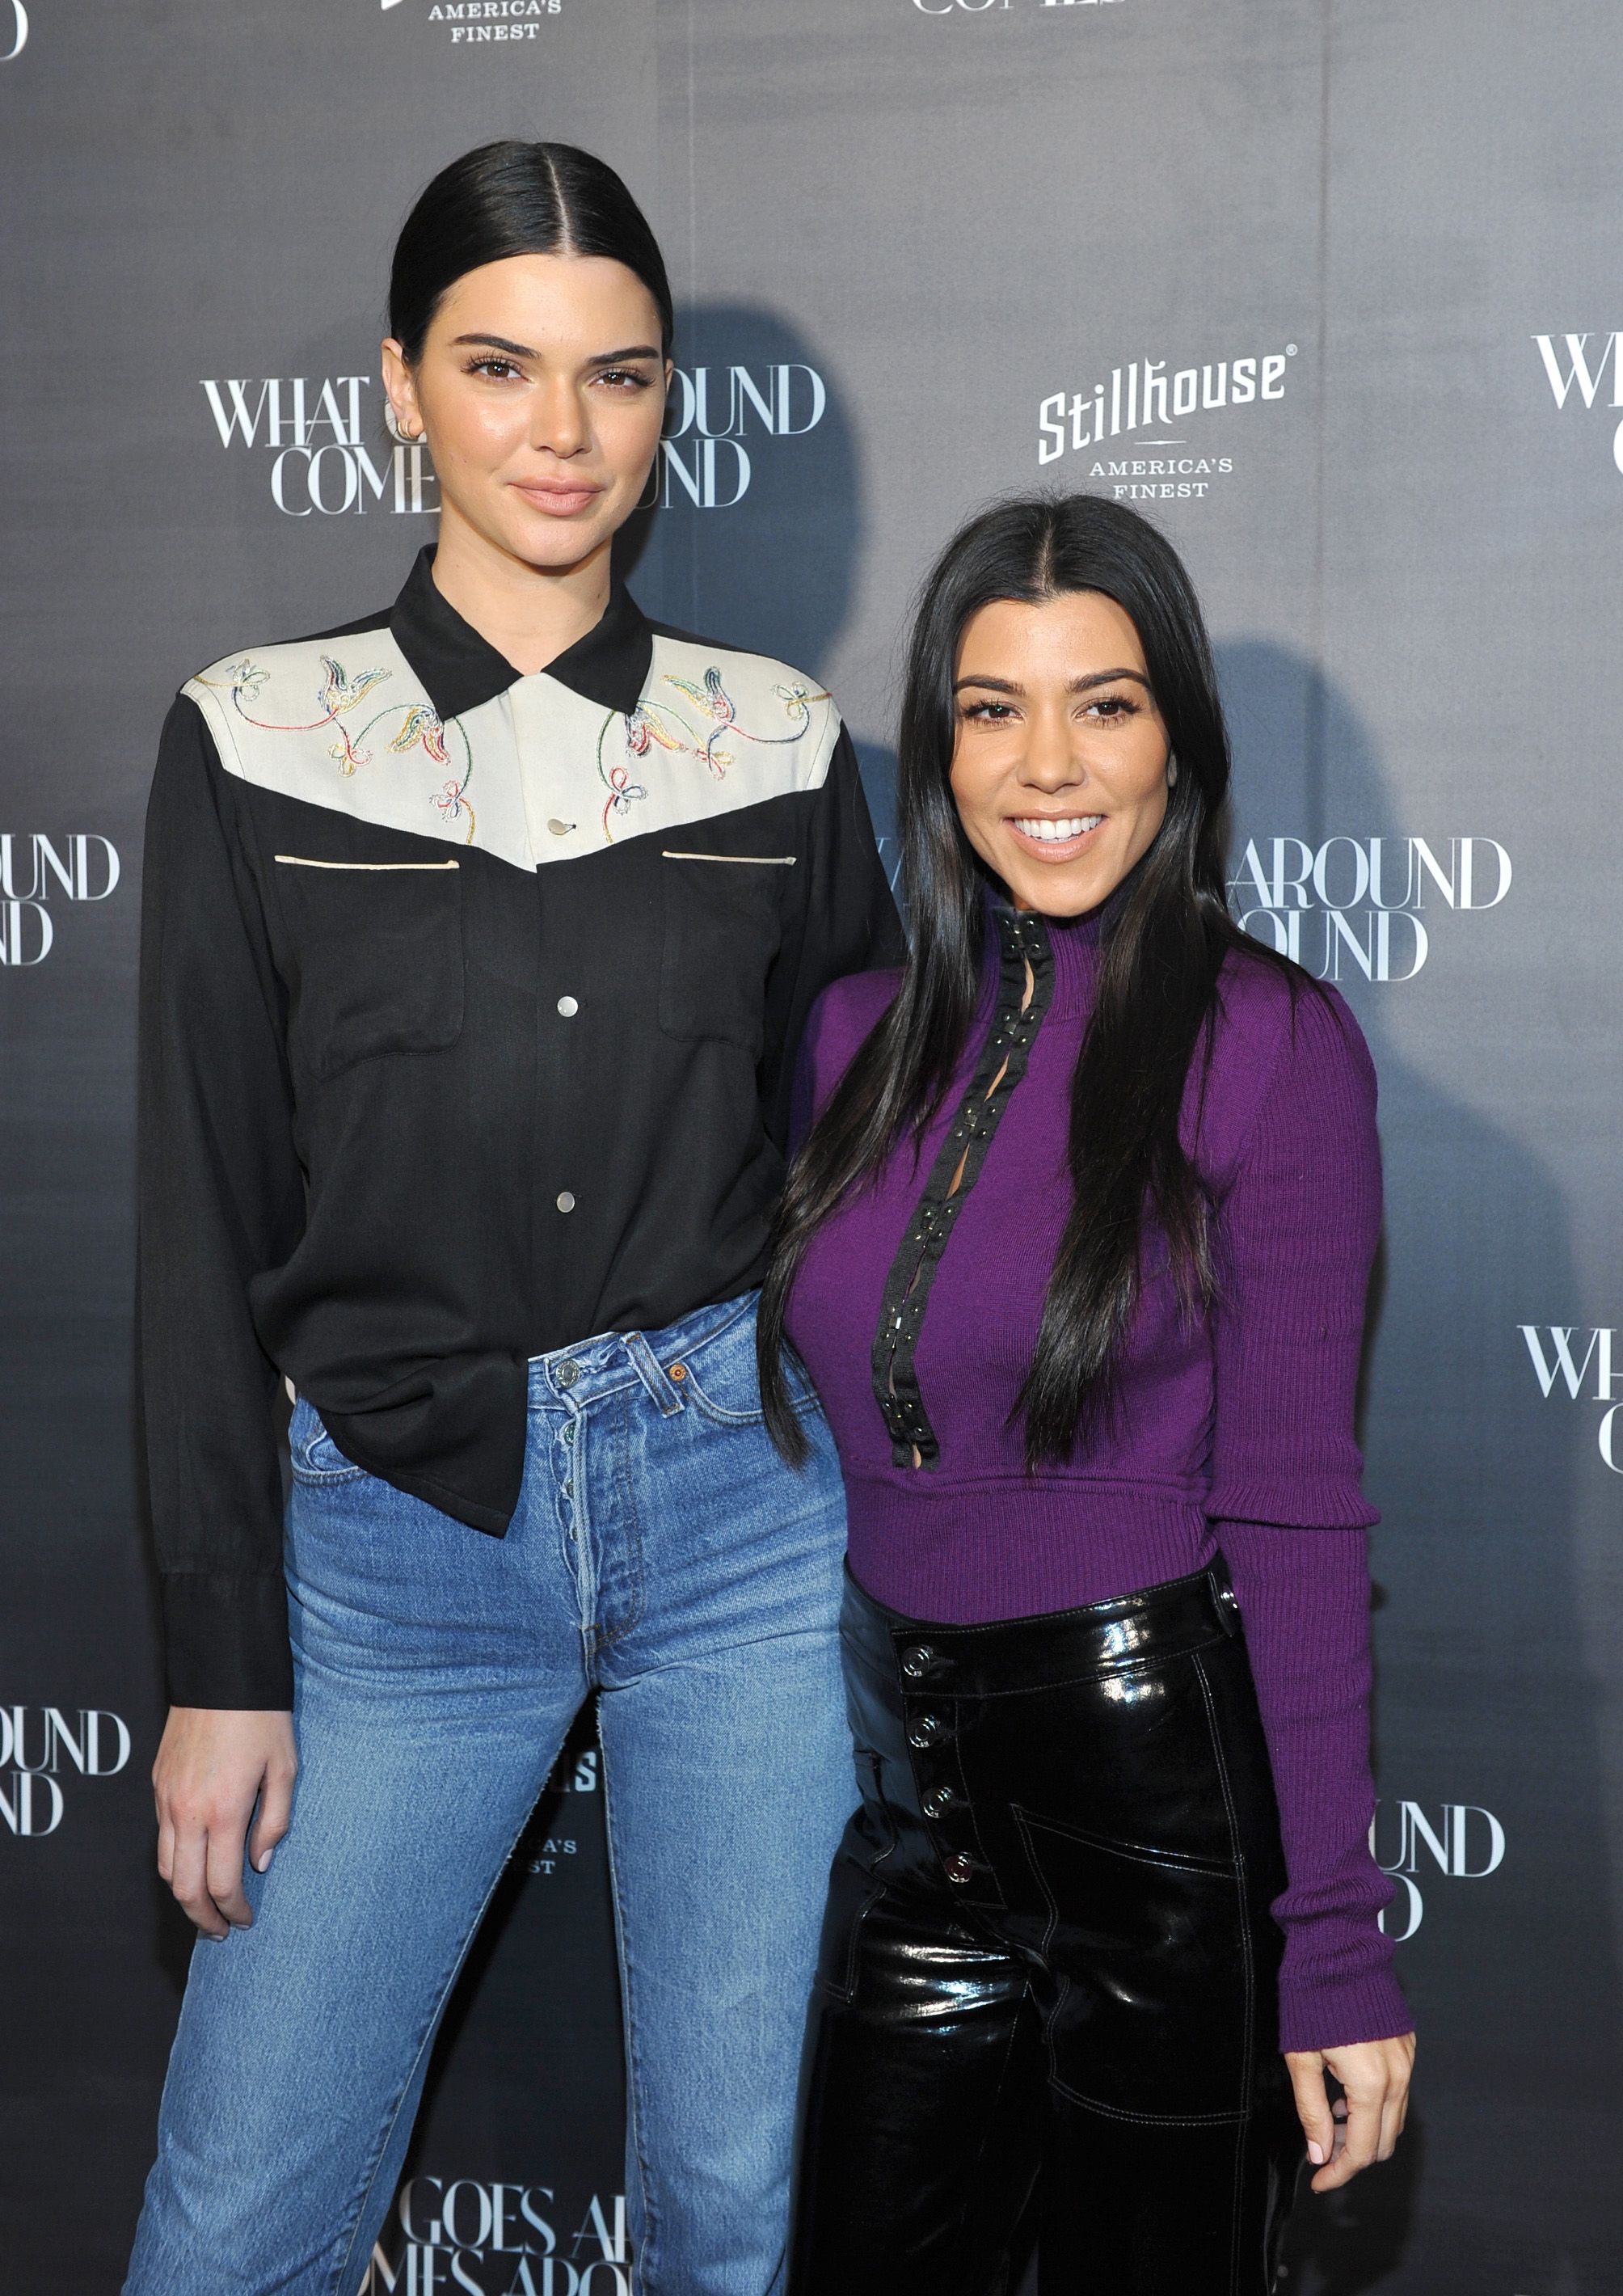 How tall is kendall jenner